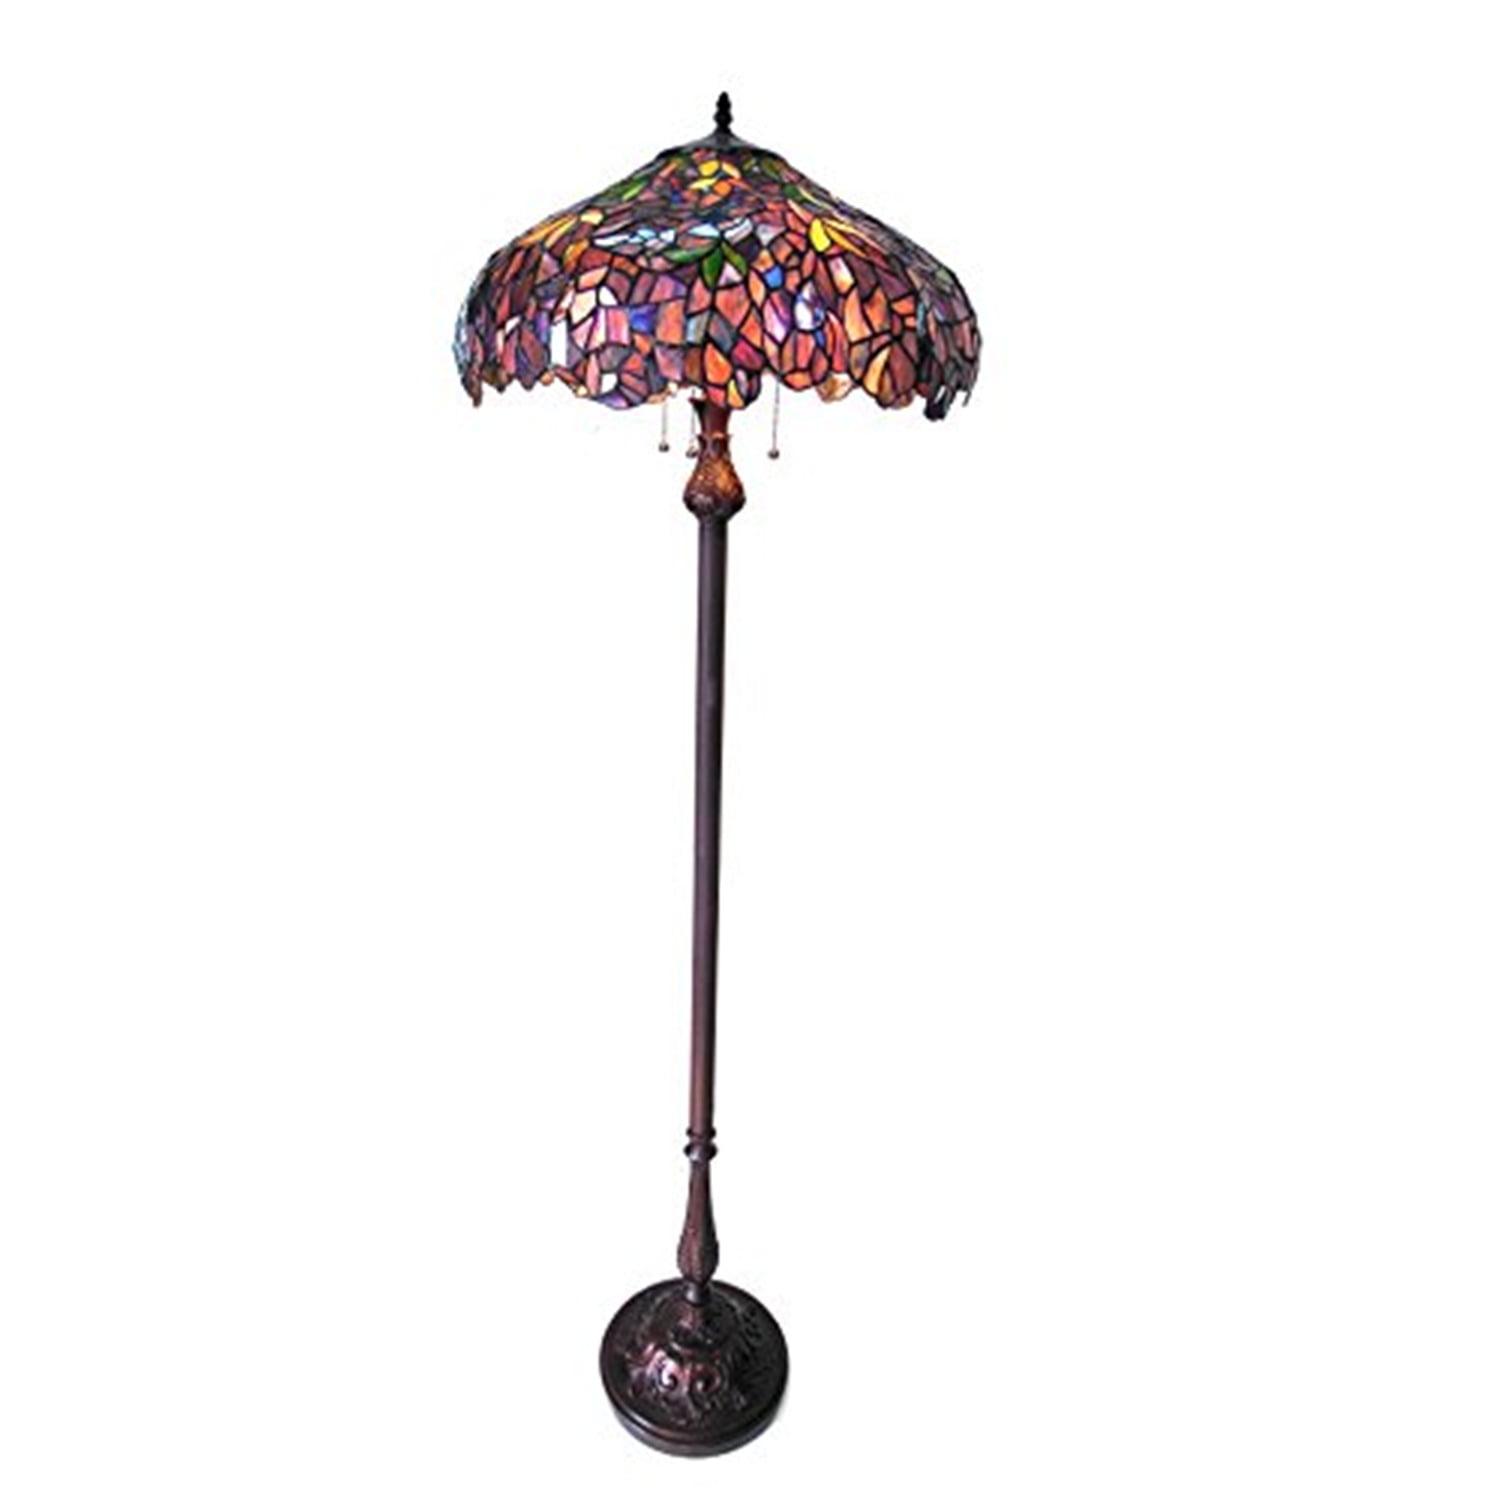 Elegant Bronze Wisteria Tiffany-Style Stained Glass Floor Lamp